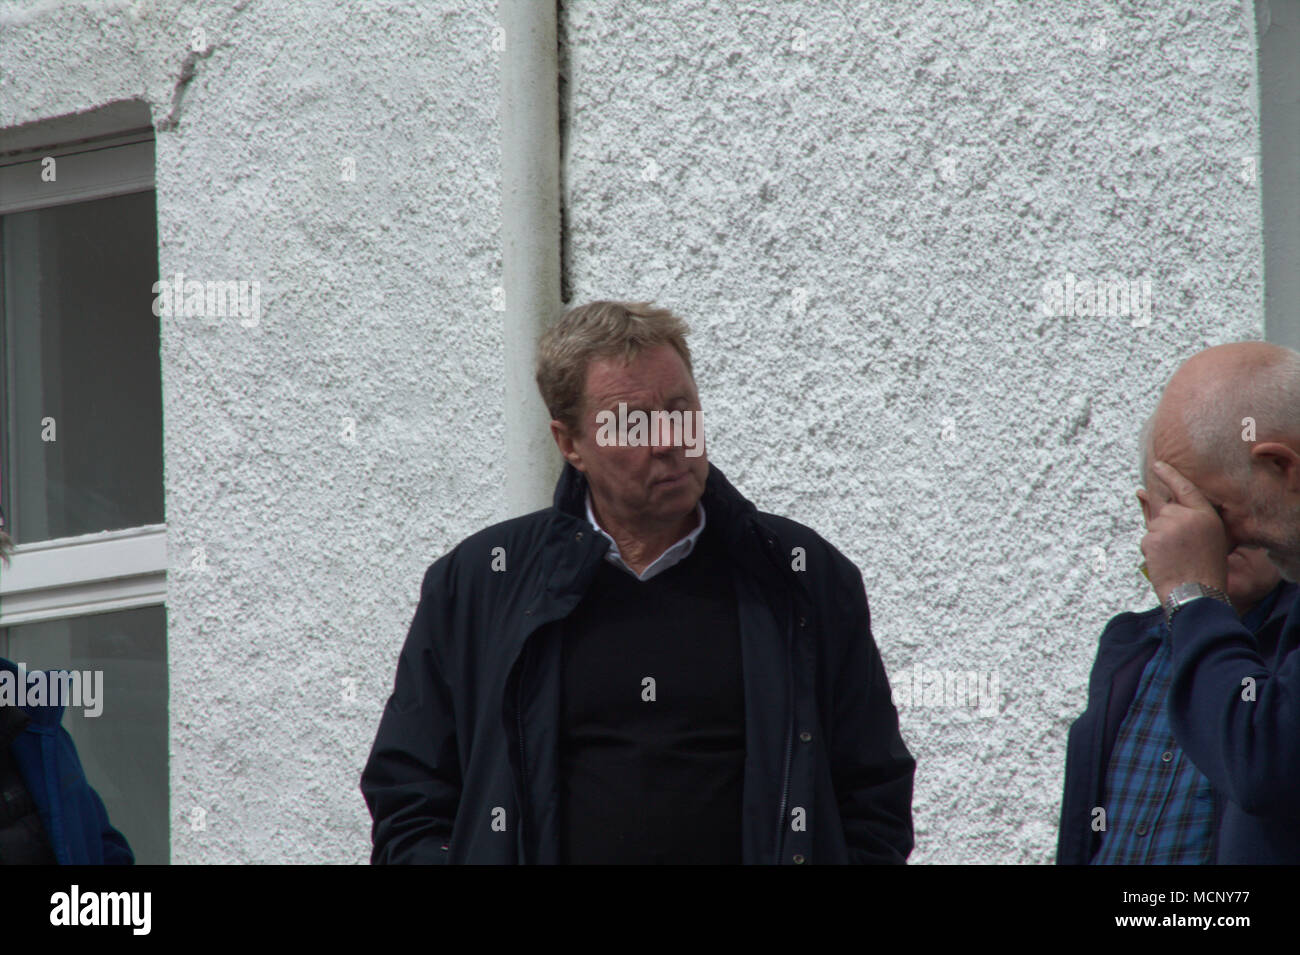 Castletownshend, West Cork, Ireland. 17th April, 2018. Harry Redknapp, former manager of Bournemouth, Tottenham Hotspur, West Ham and Birmingham football clubs payed a visit to the small West Cork village of Castletownshend. Harry was visiting as part of an ongoing project with the GAA and took time to meet and greet the locals, shaking hands and signing autographs. Credit: aphperspective/Alamy Live News Stock Photo